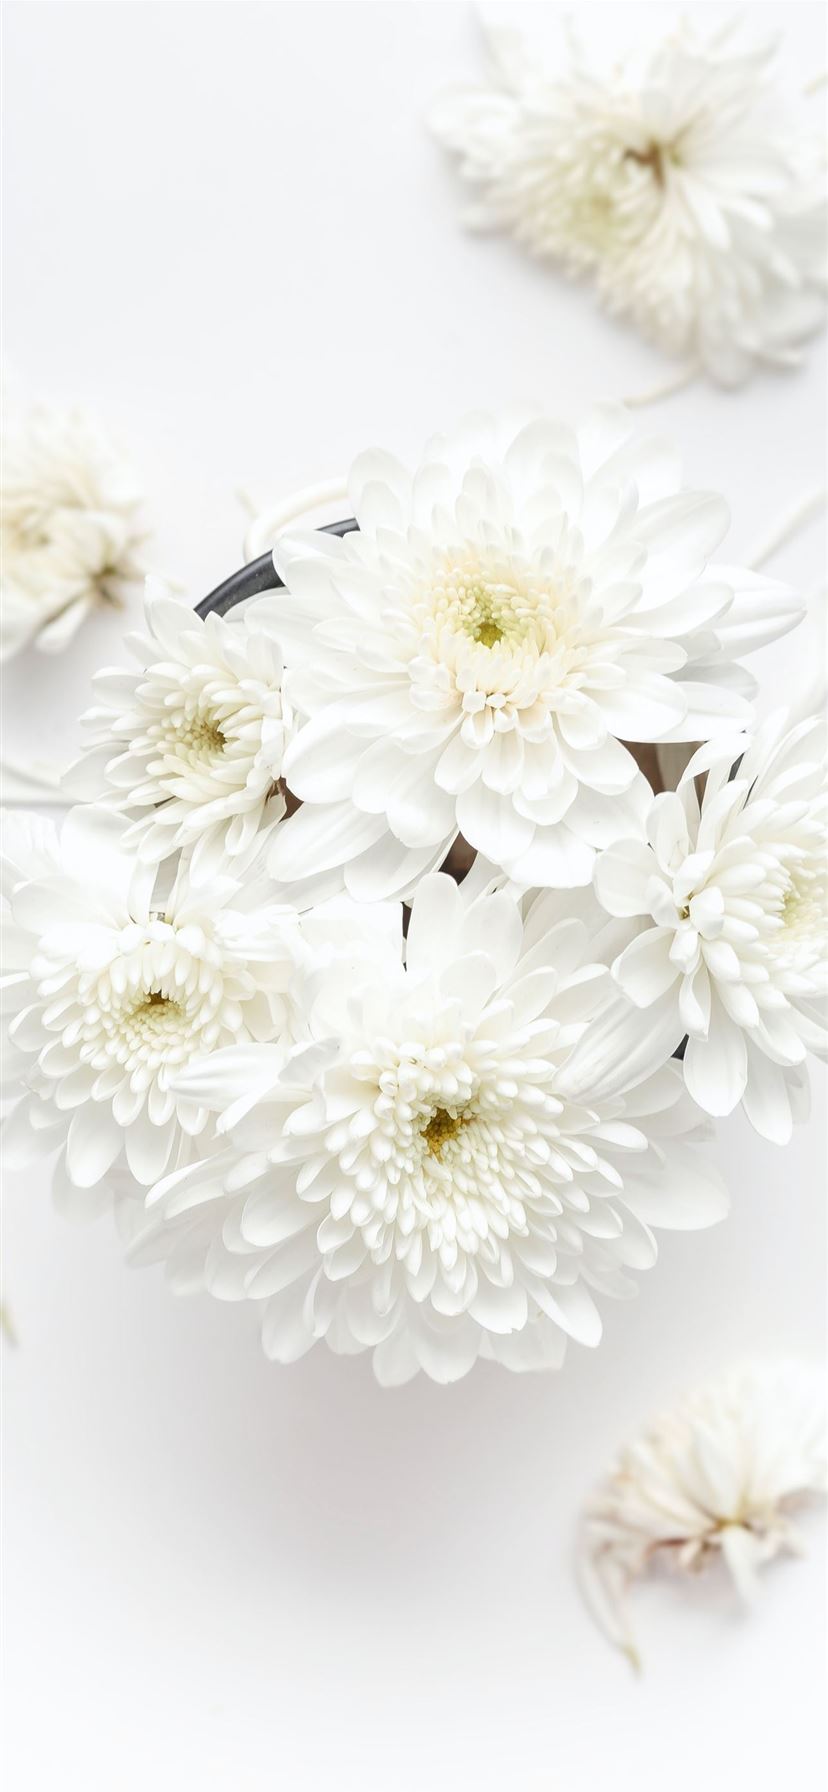 white petaled flower on white background iPhone 11 Wallpapers Free Download